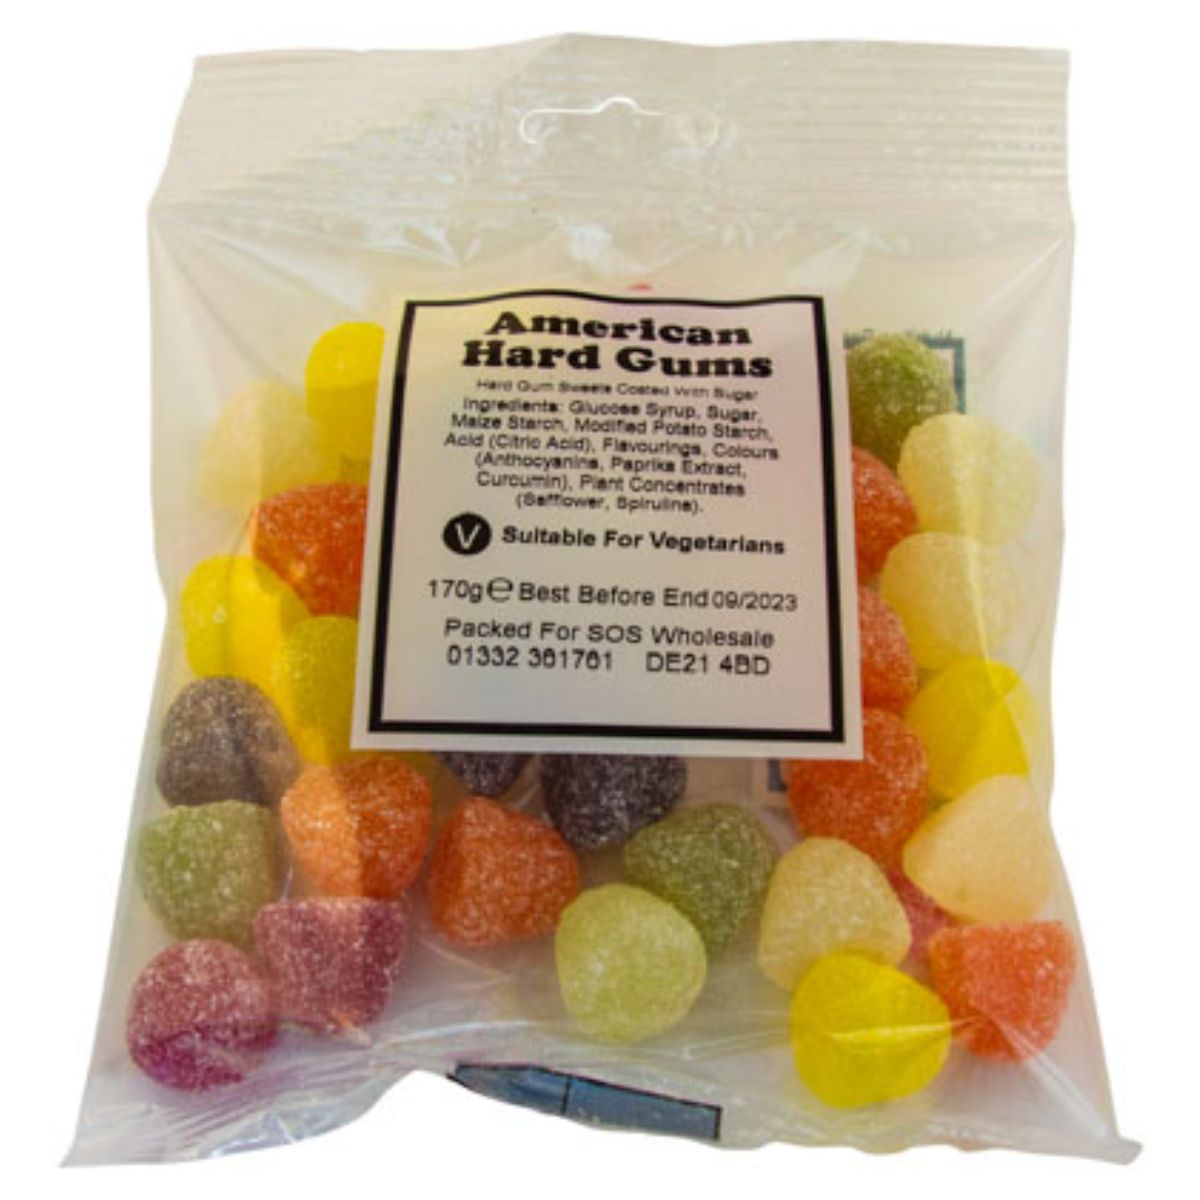 A Bumper Bag of American Hard Gums - 140g in a white background.